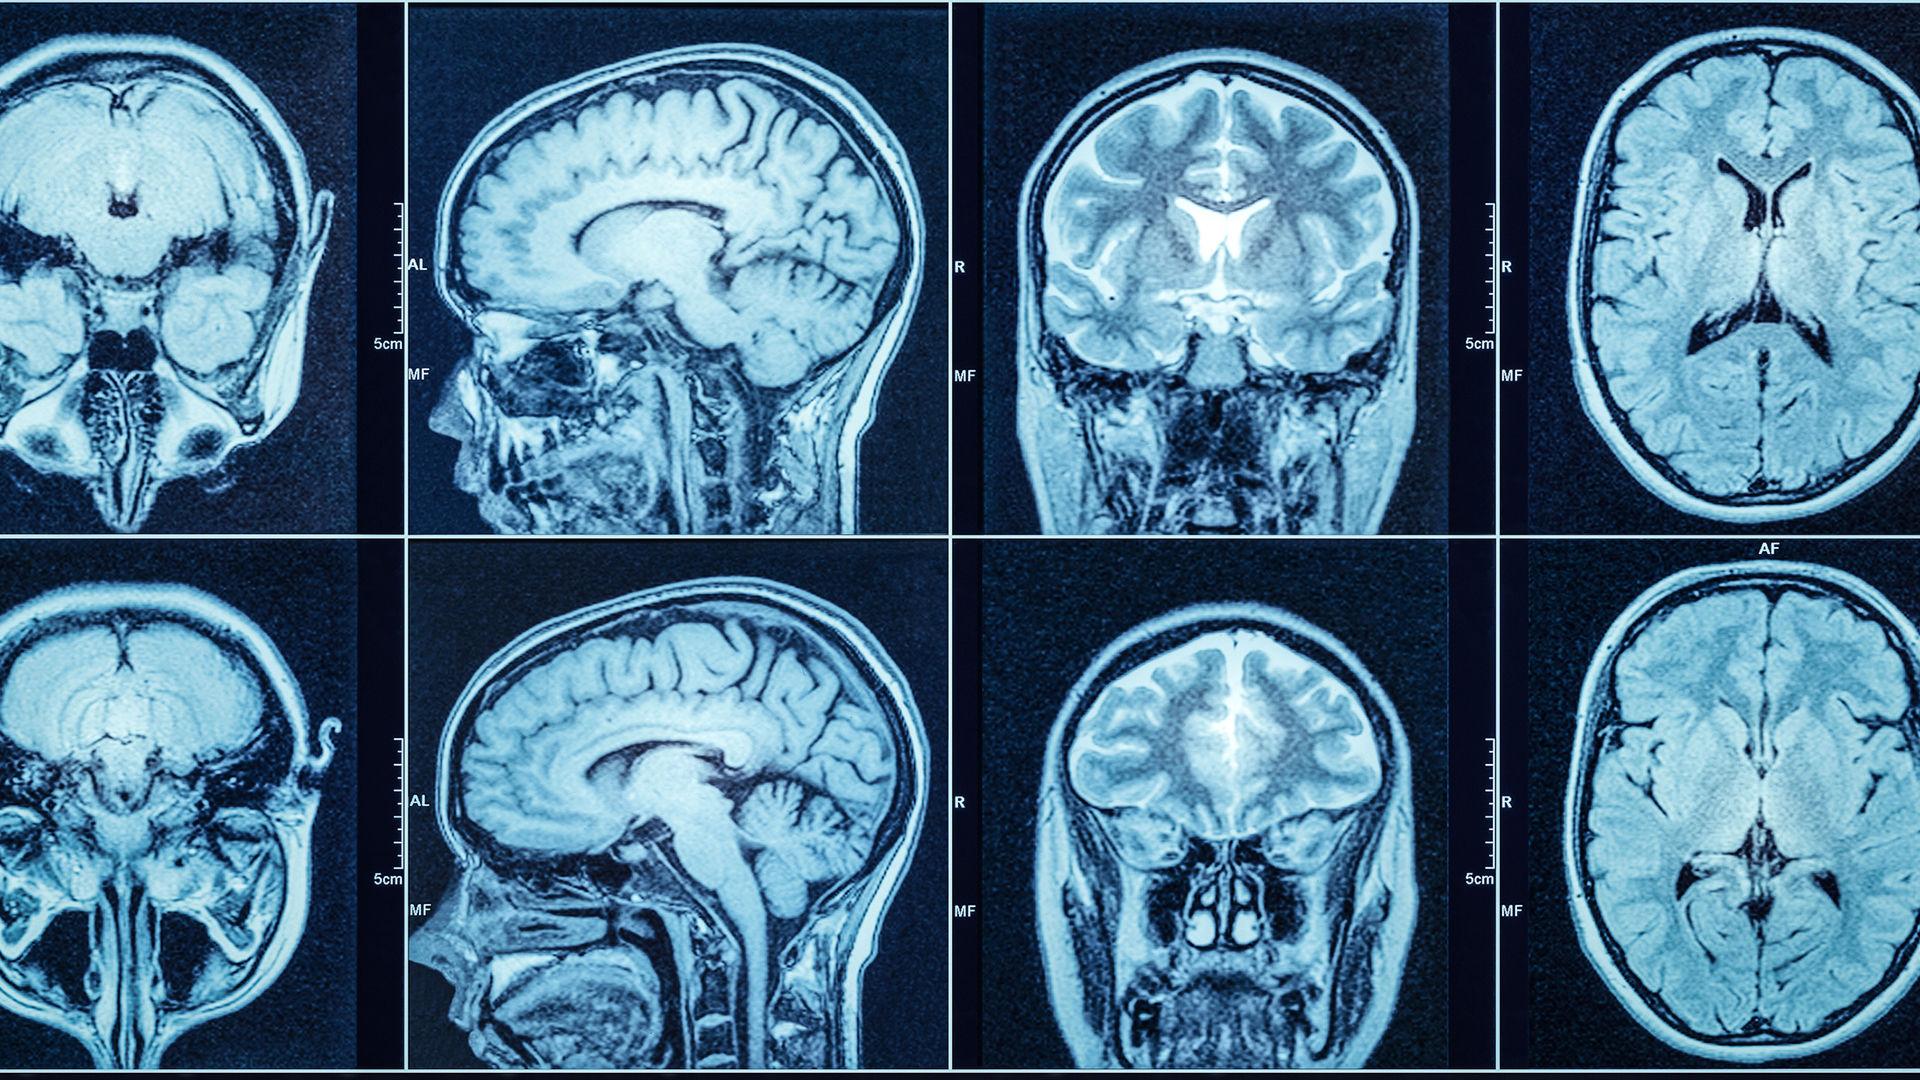 Extending the reach of MRI with new portable brain imaging